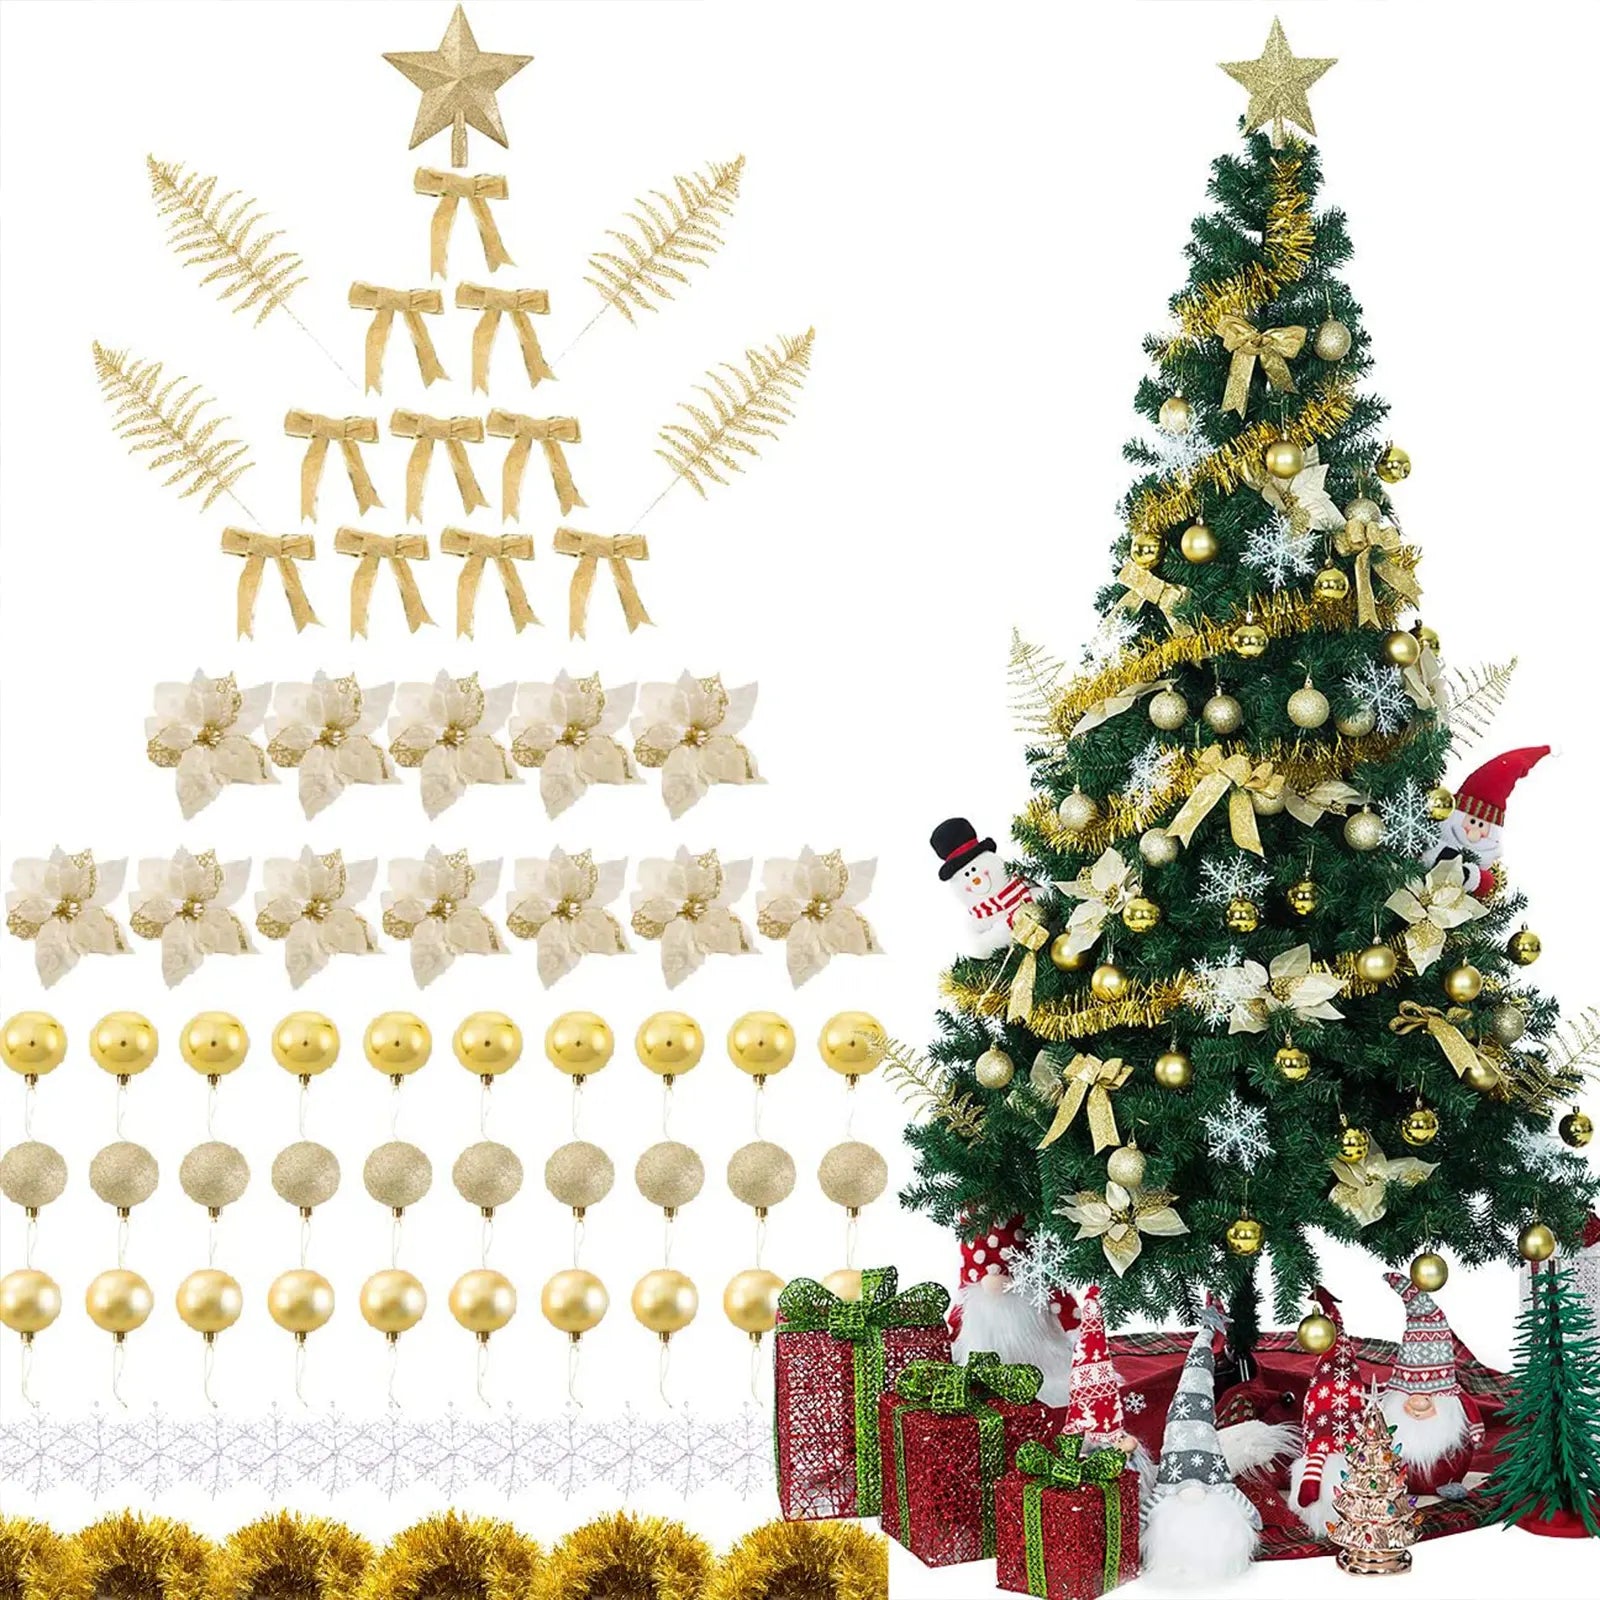 94 PCS Christmas Tree Ornaments Set with Glitter Poinsettia, Bows, Ribbons, Leaves & Assorted Decoration Ball